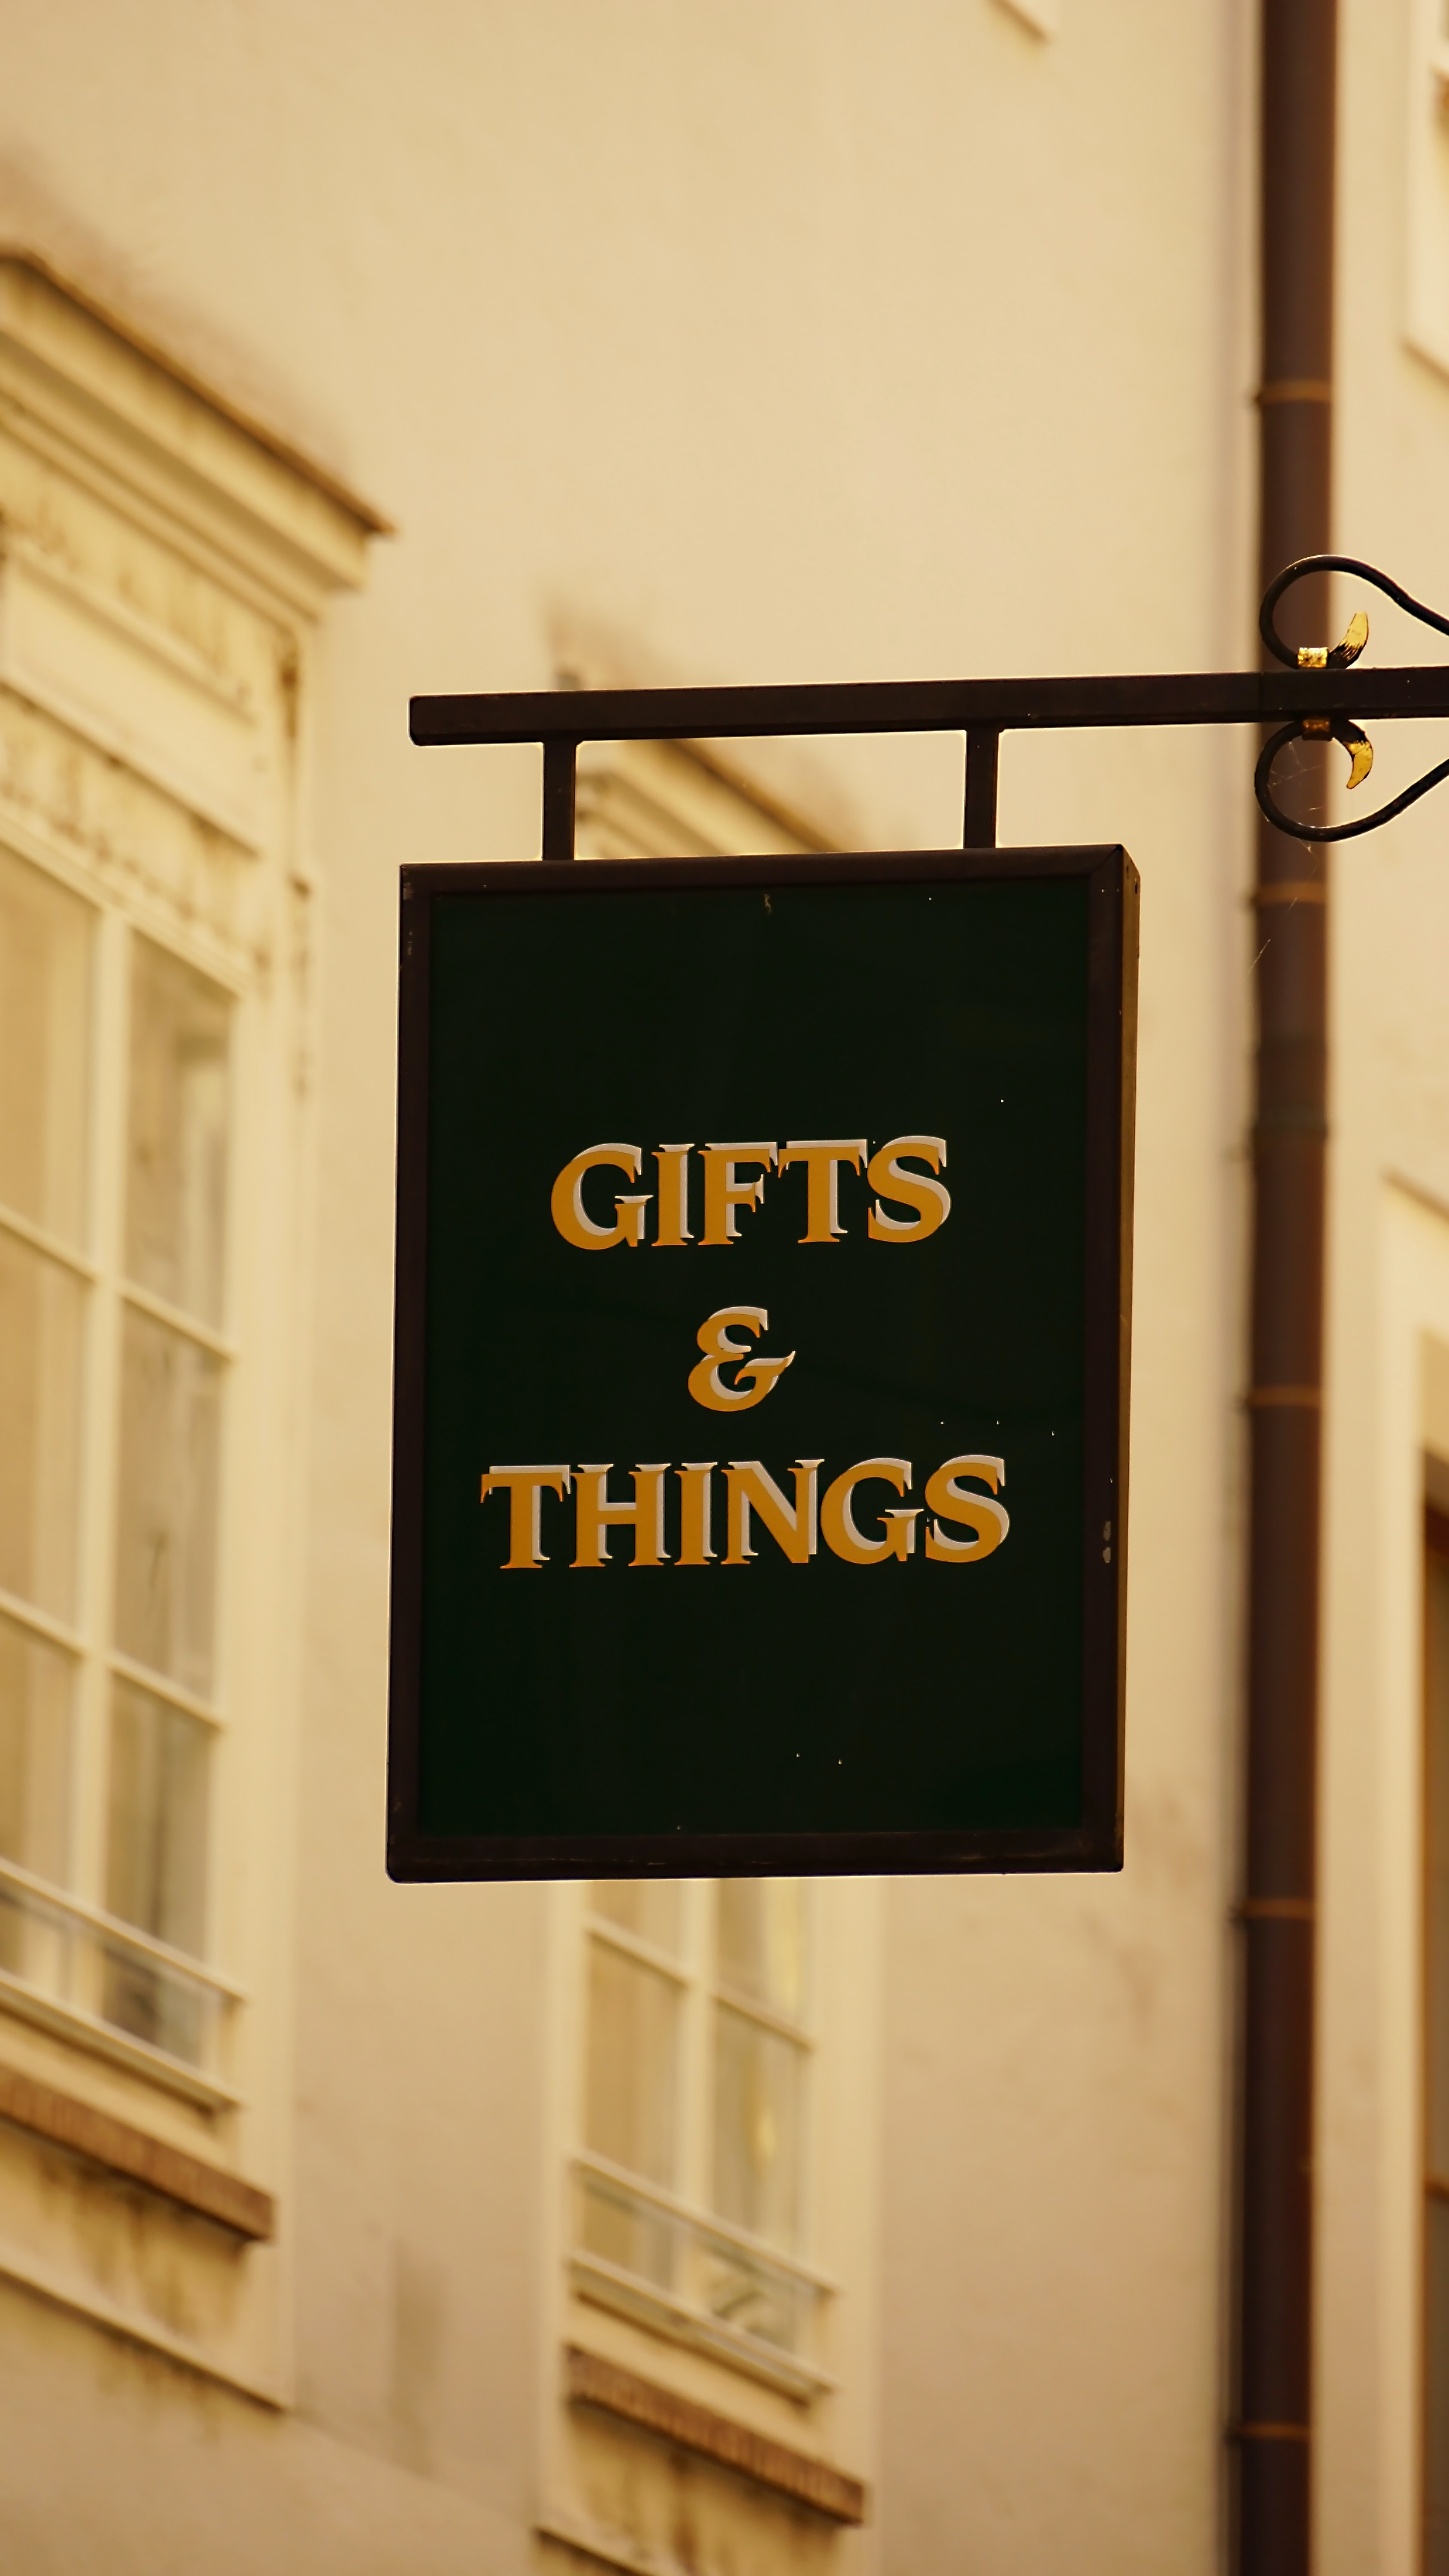 words, signboard, inscription, text, sign, things, belongings, presents, gifts